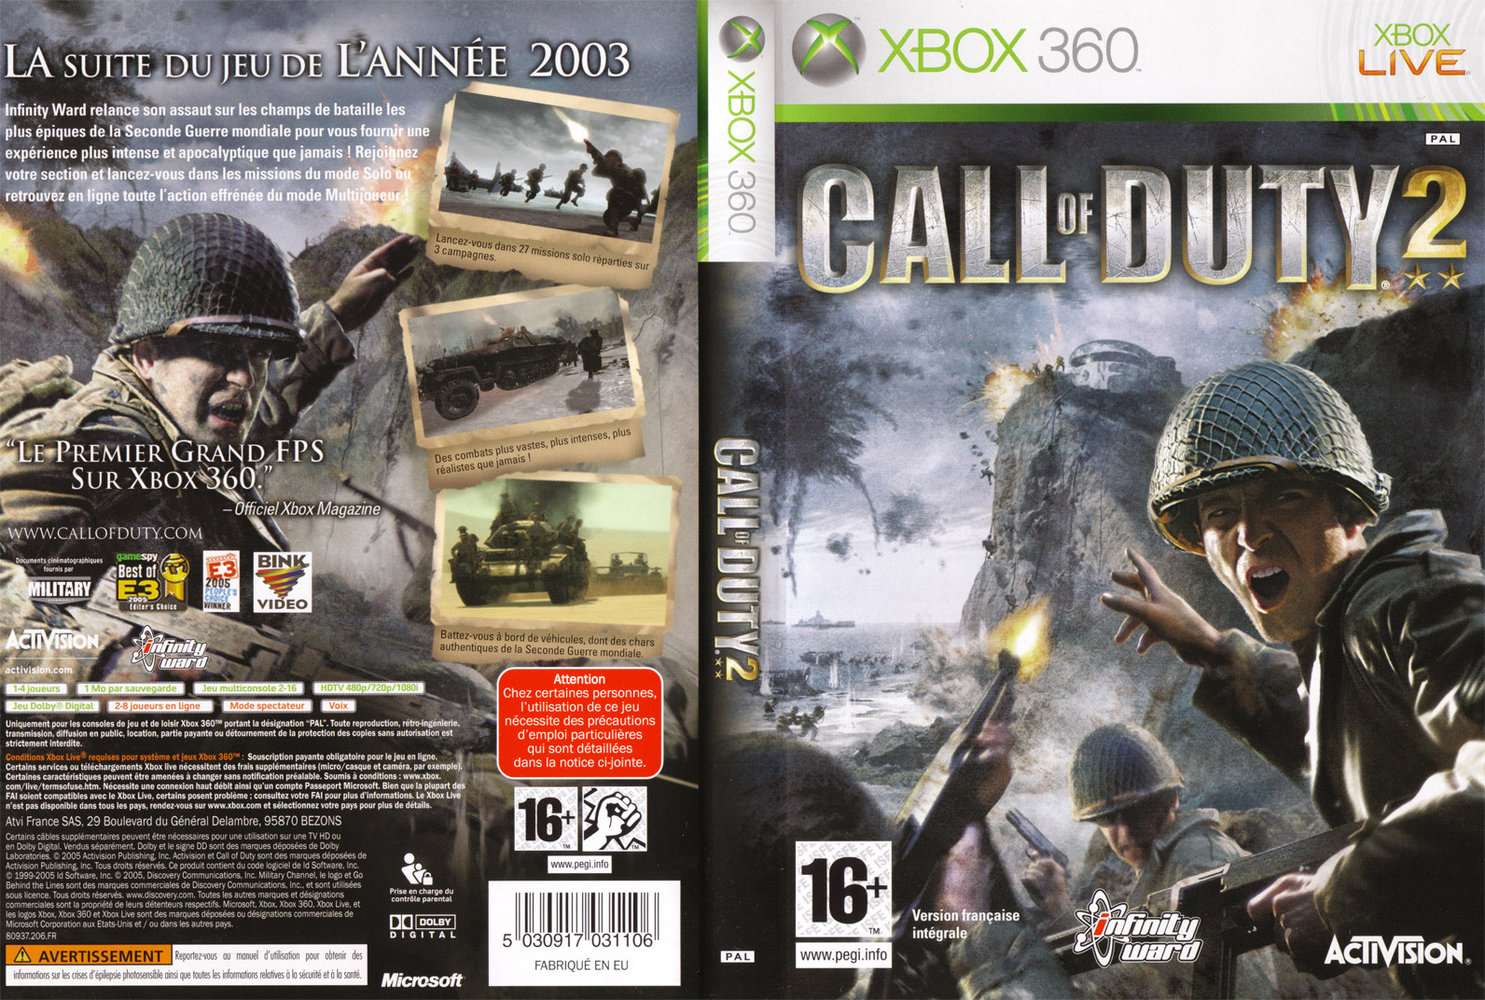 Call Of Duty 2 PAL XBOX360 FULL | XBOX Covers | Cover ...